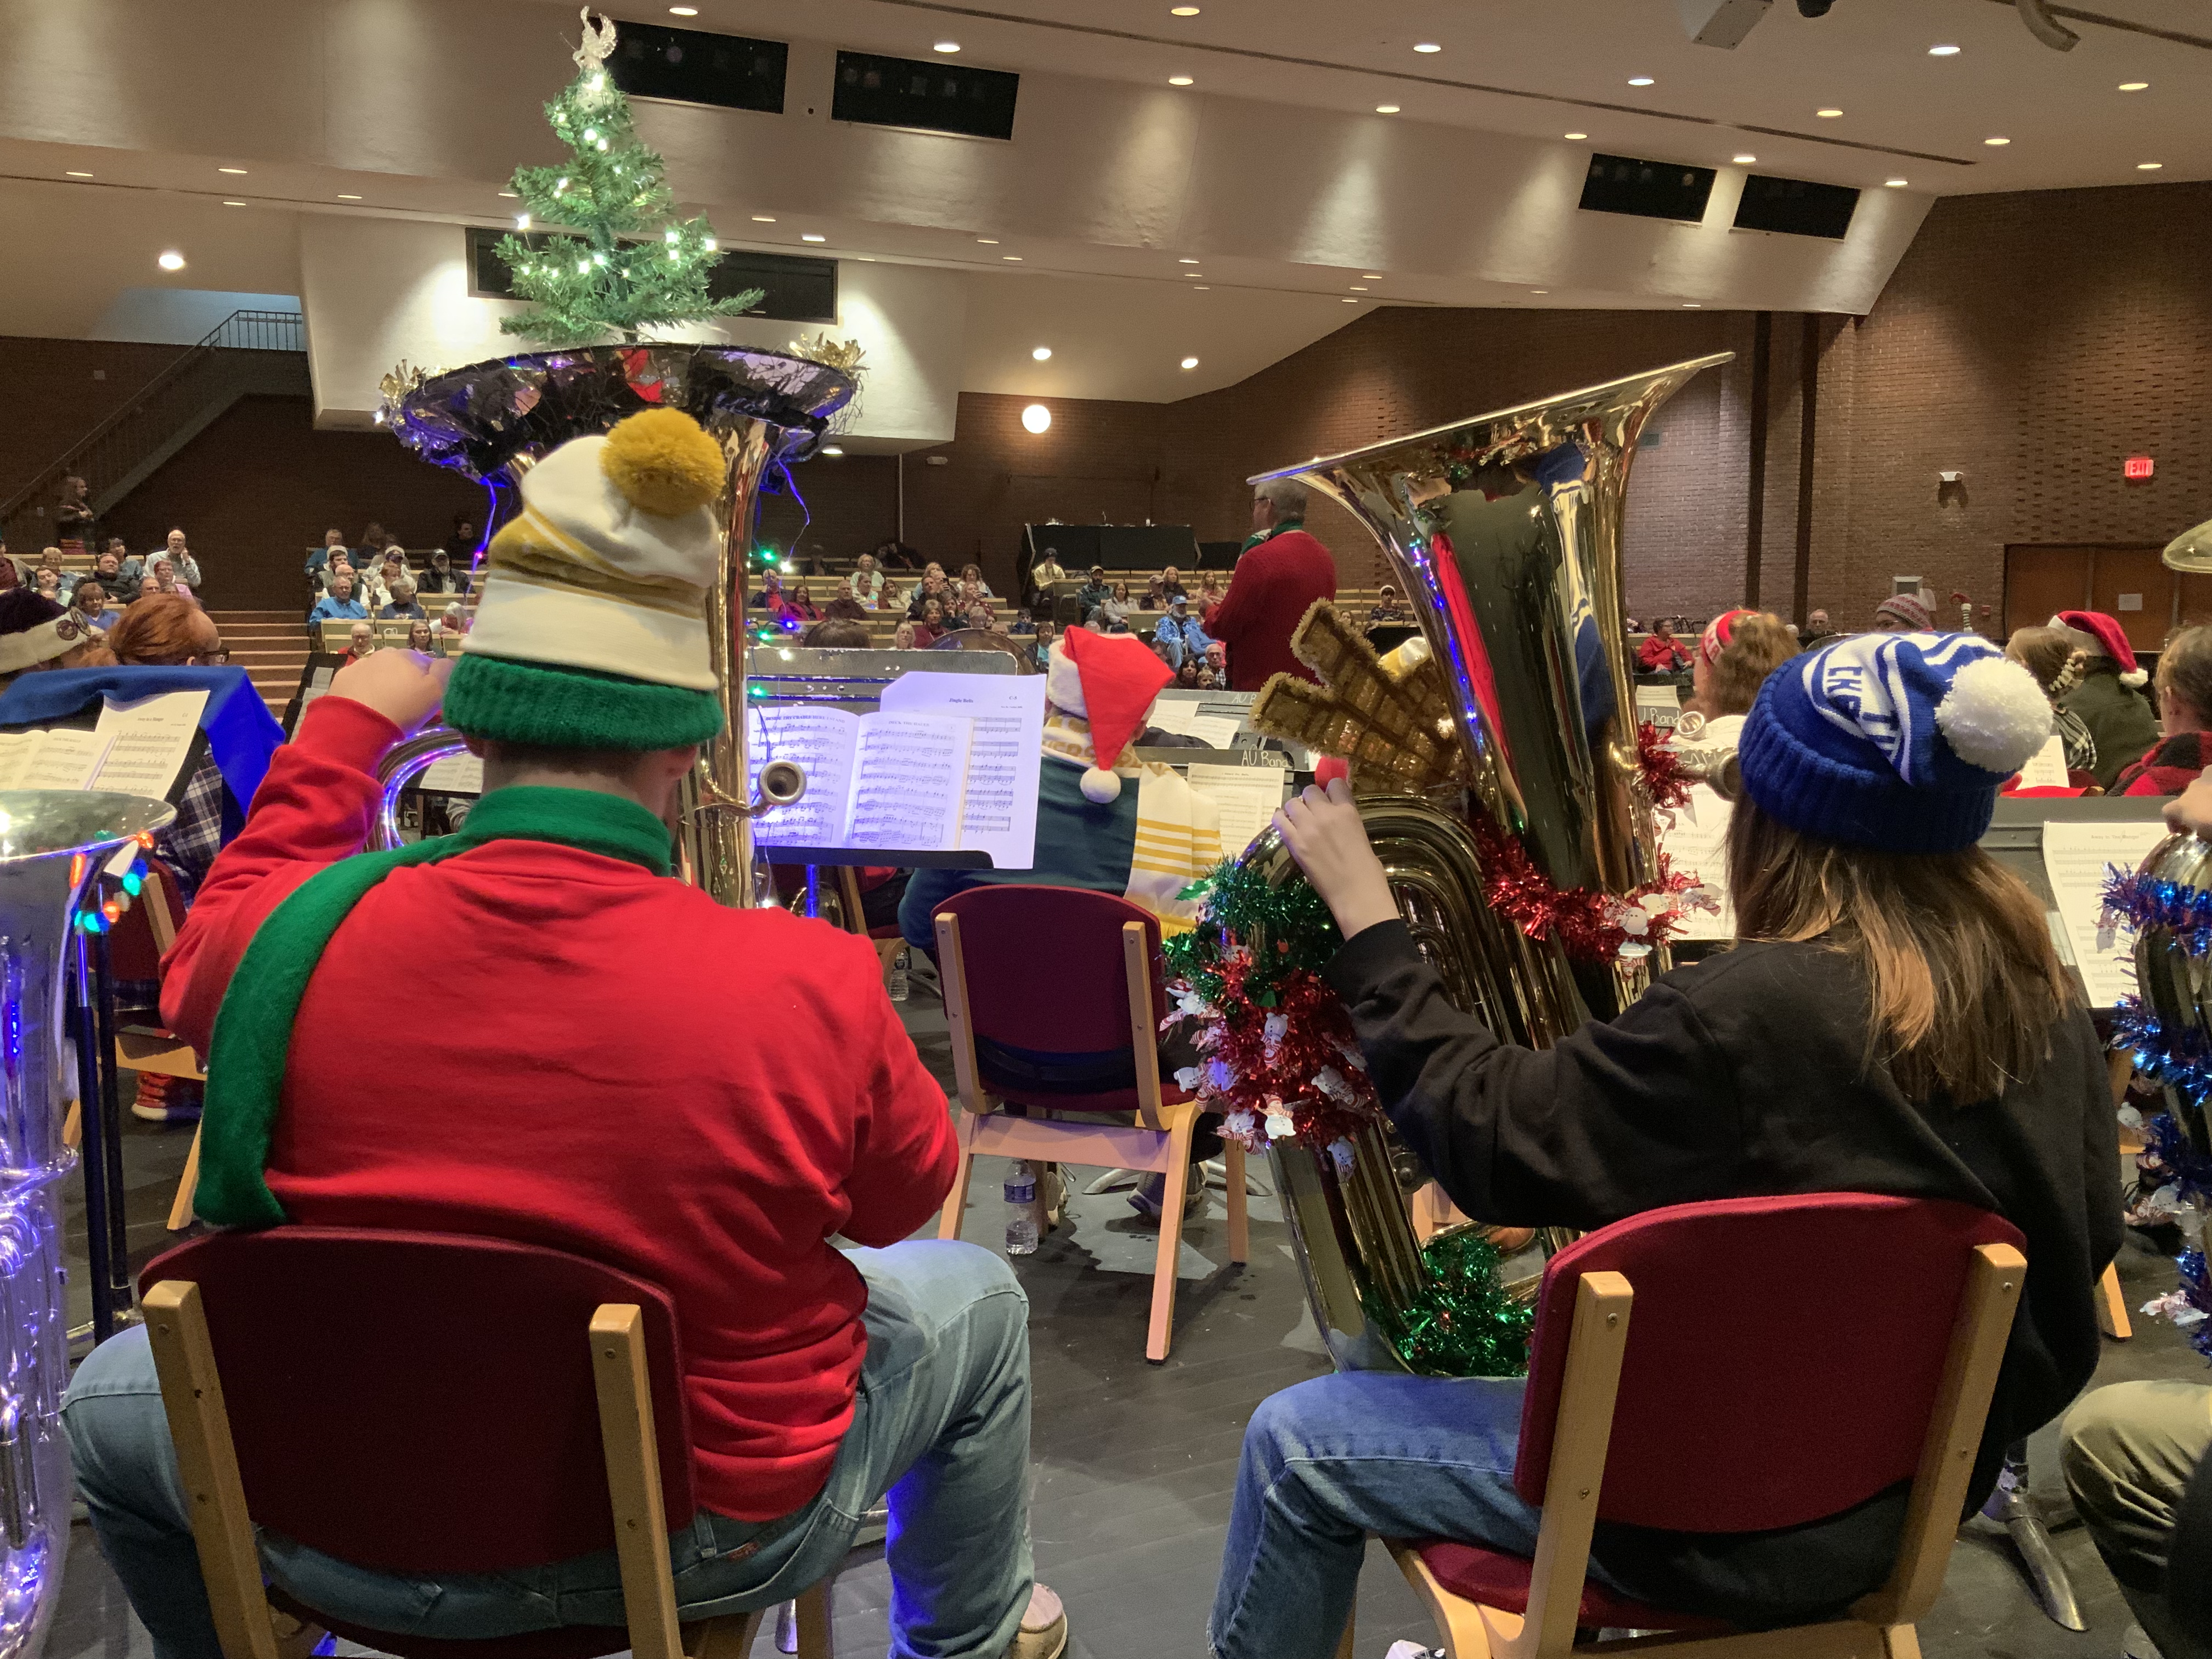 Members of the 2023 Ashland TubaChristmas ensemble and audience. One of the tubas has Christmas lights and even a lit up Christmas tree on its bell.